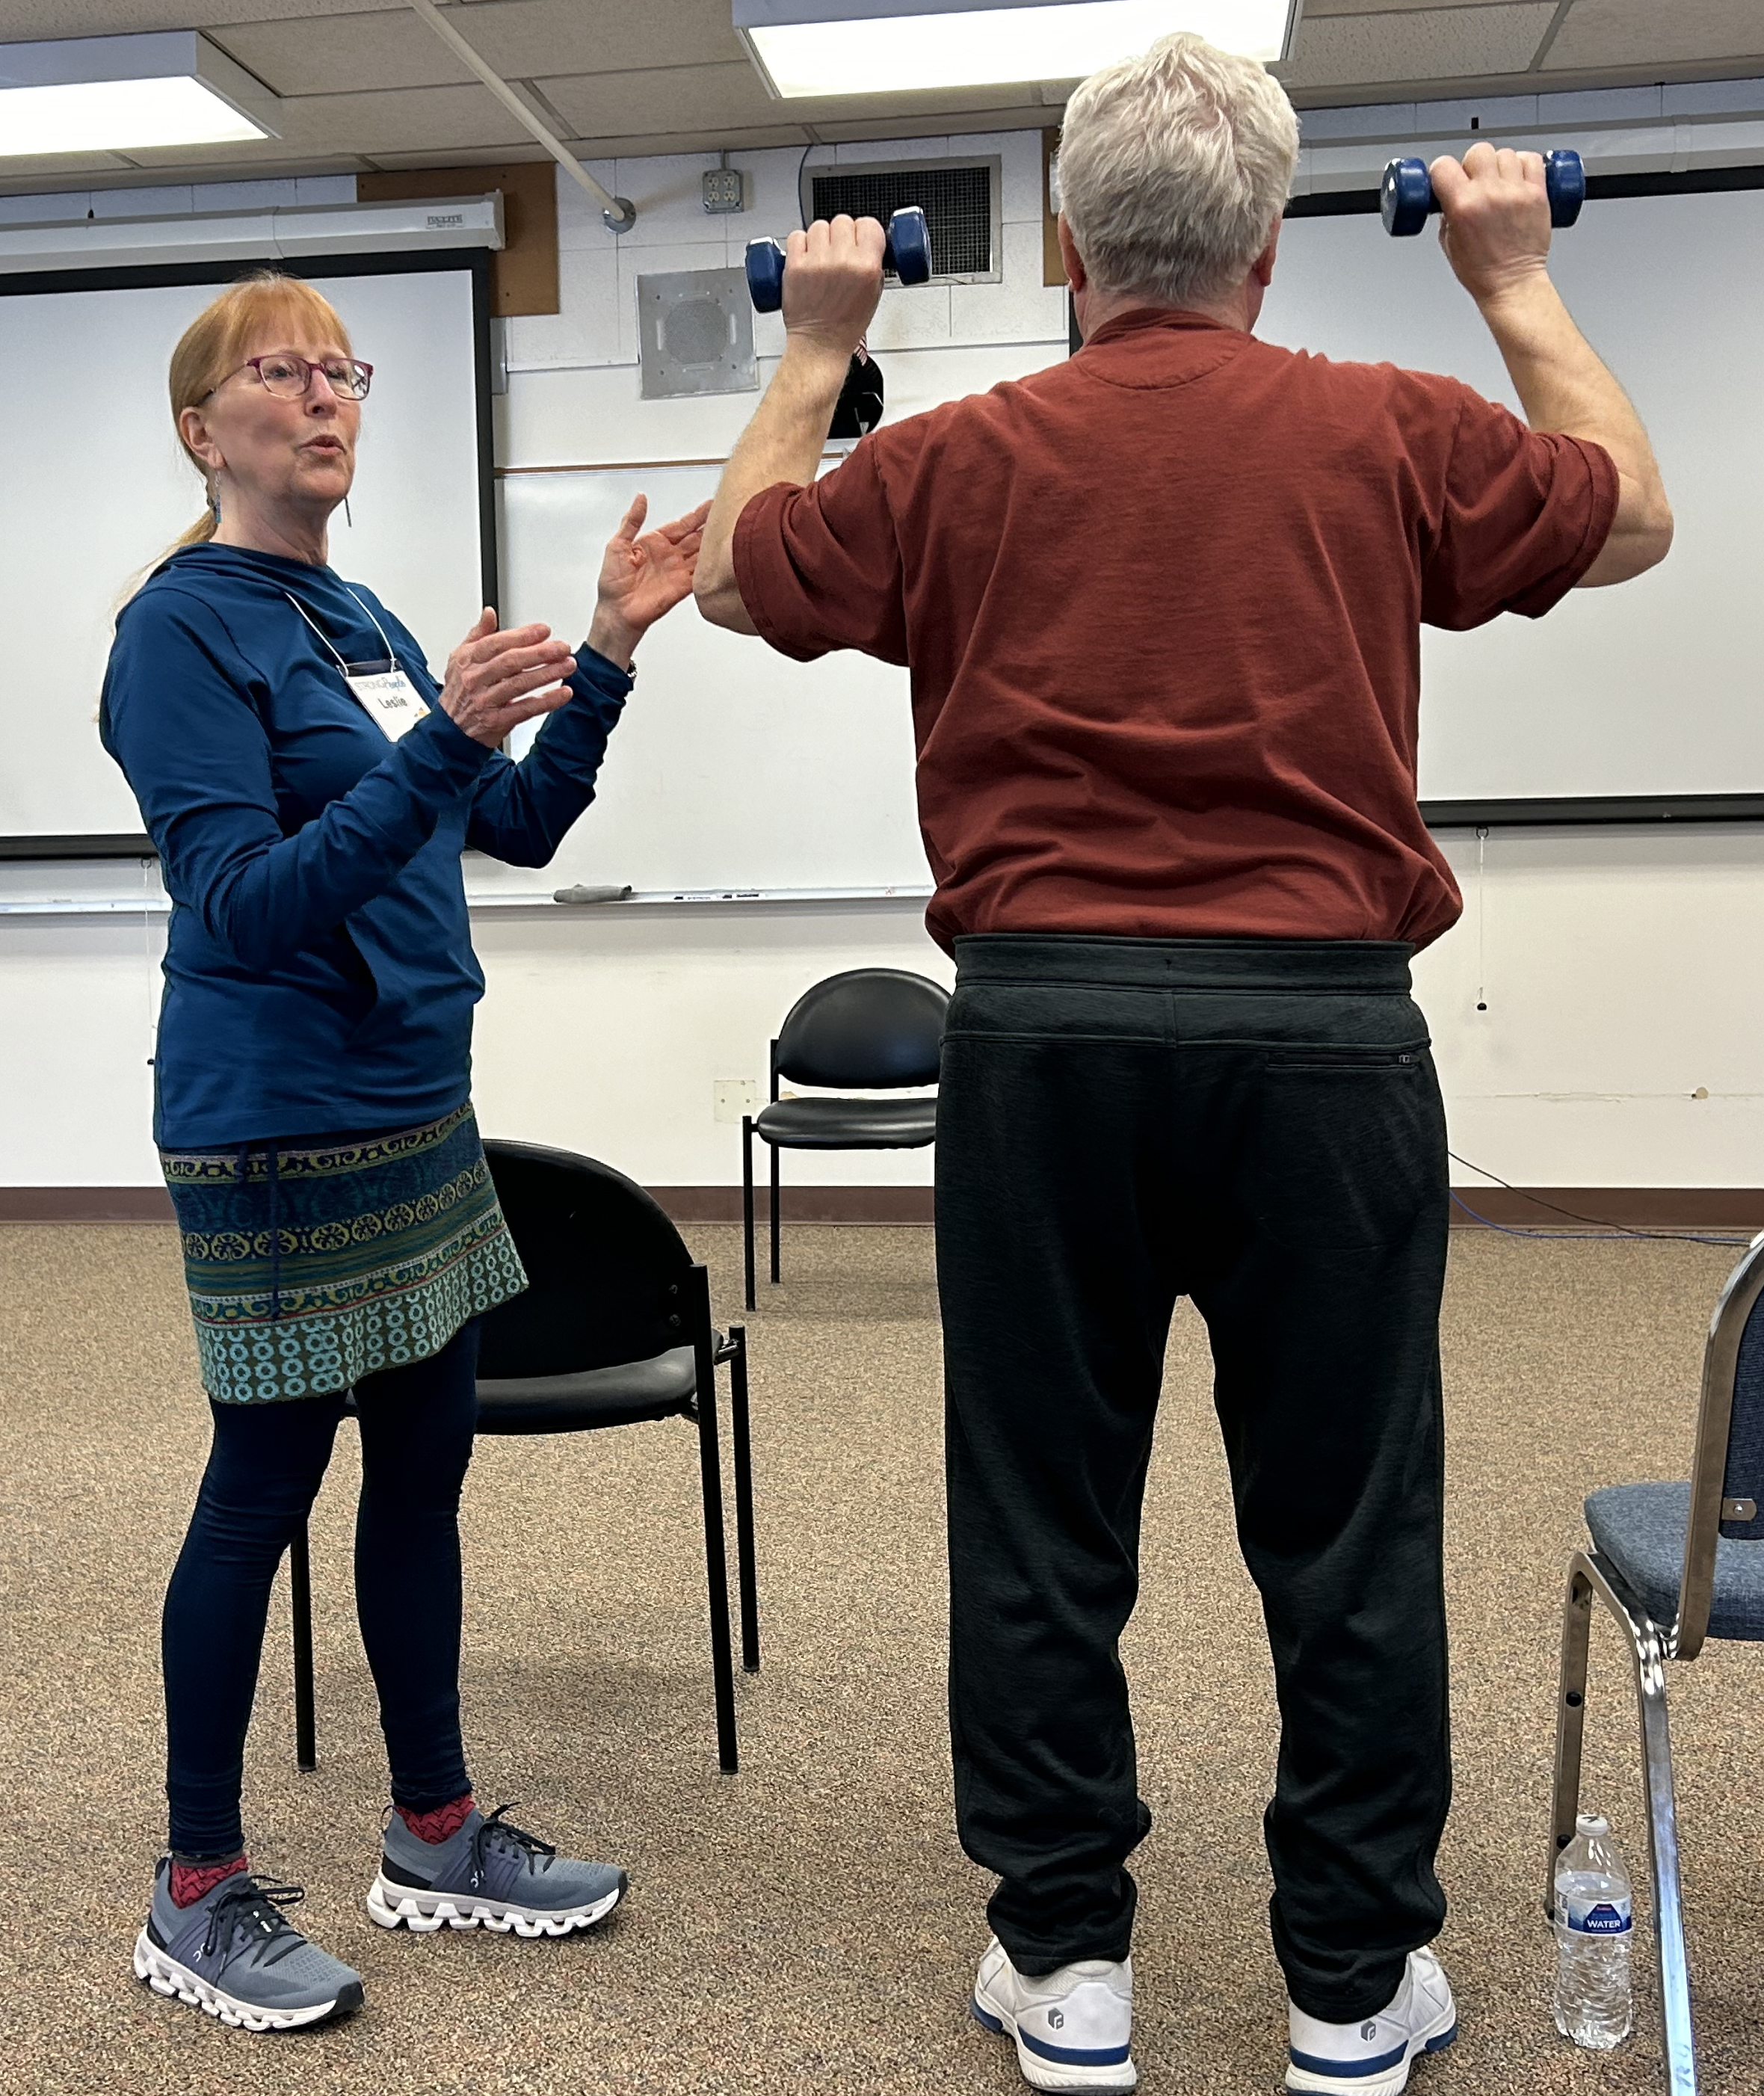 A woman coaches a man with weights in his hands in an exercise.